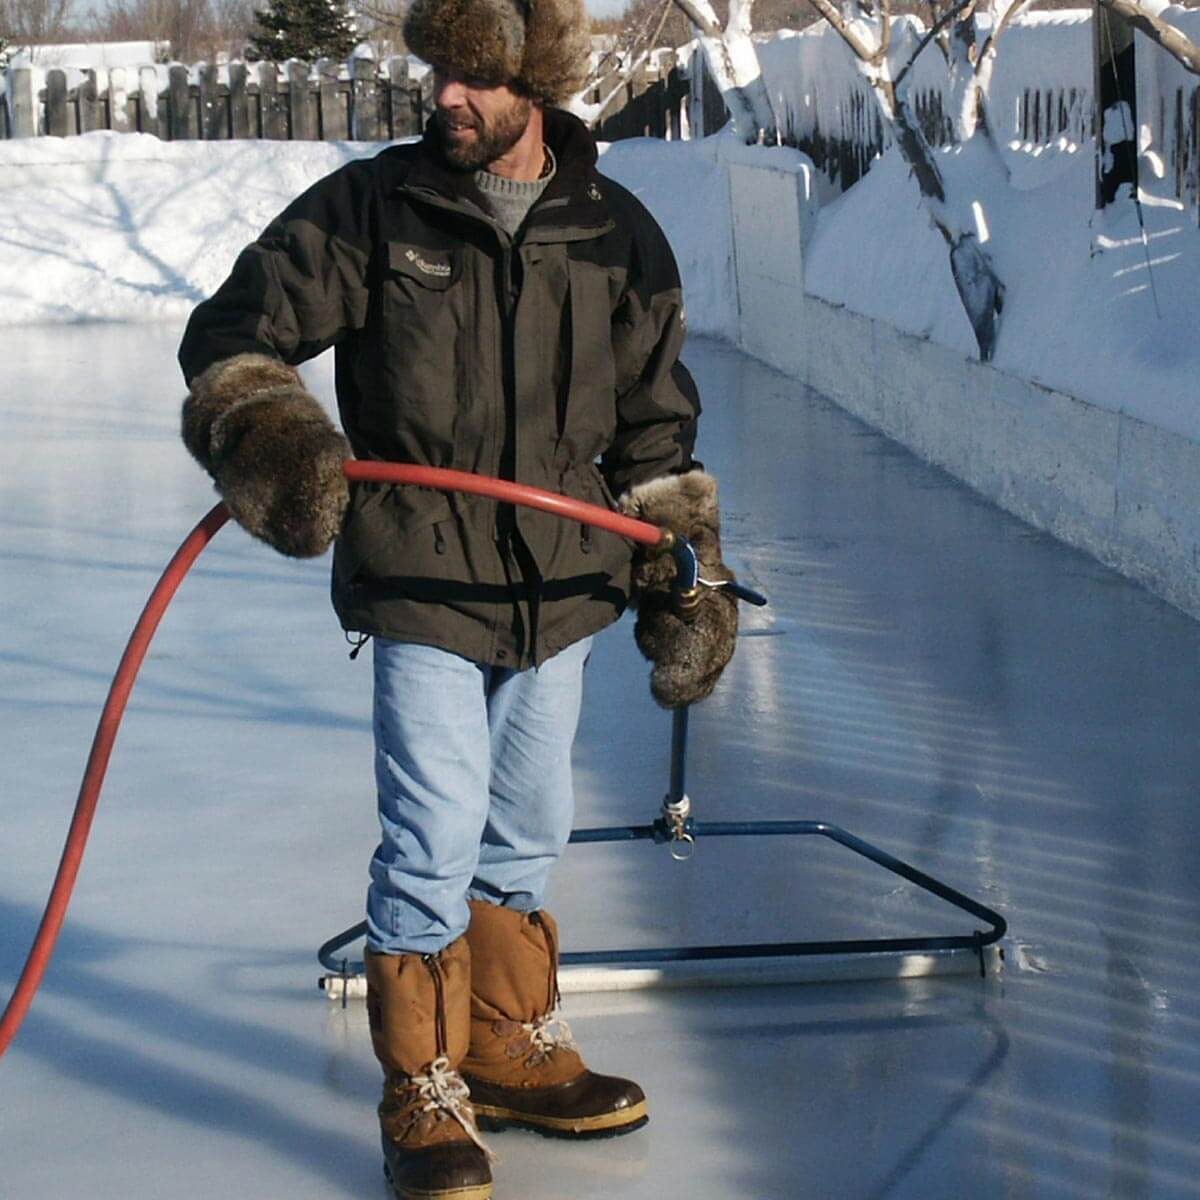 12 Tips for How to Build a DIY Ice Skating Rink in Your Backyard